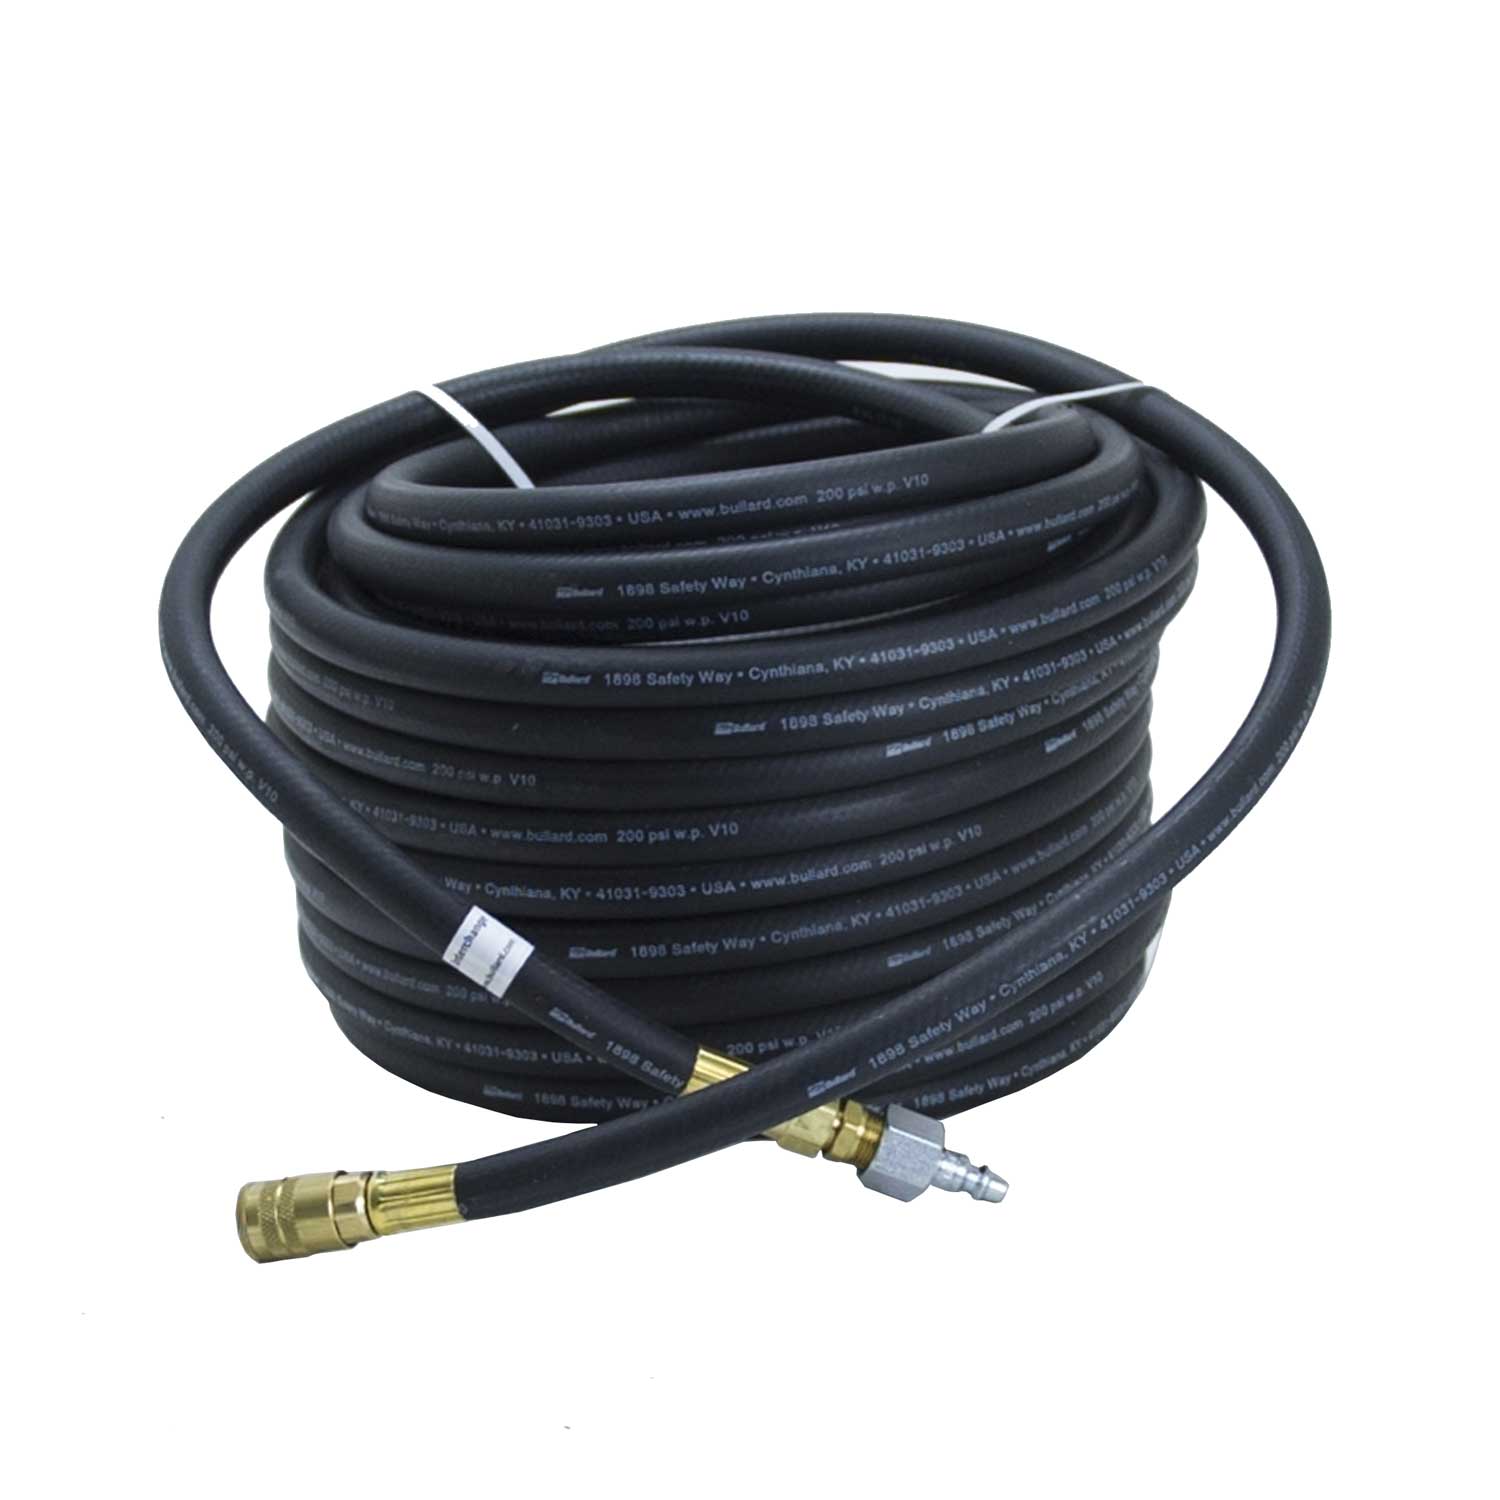 4696100 - Air Supply Hose V10 3/8"ID 100 ft. (use for compressed air) - PURspray